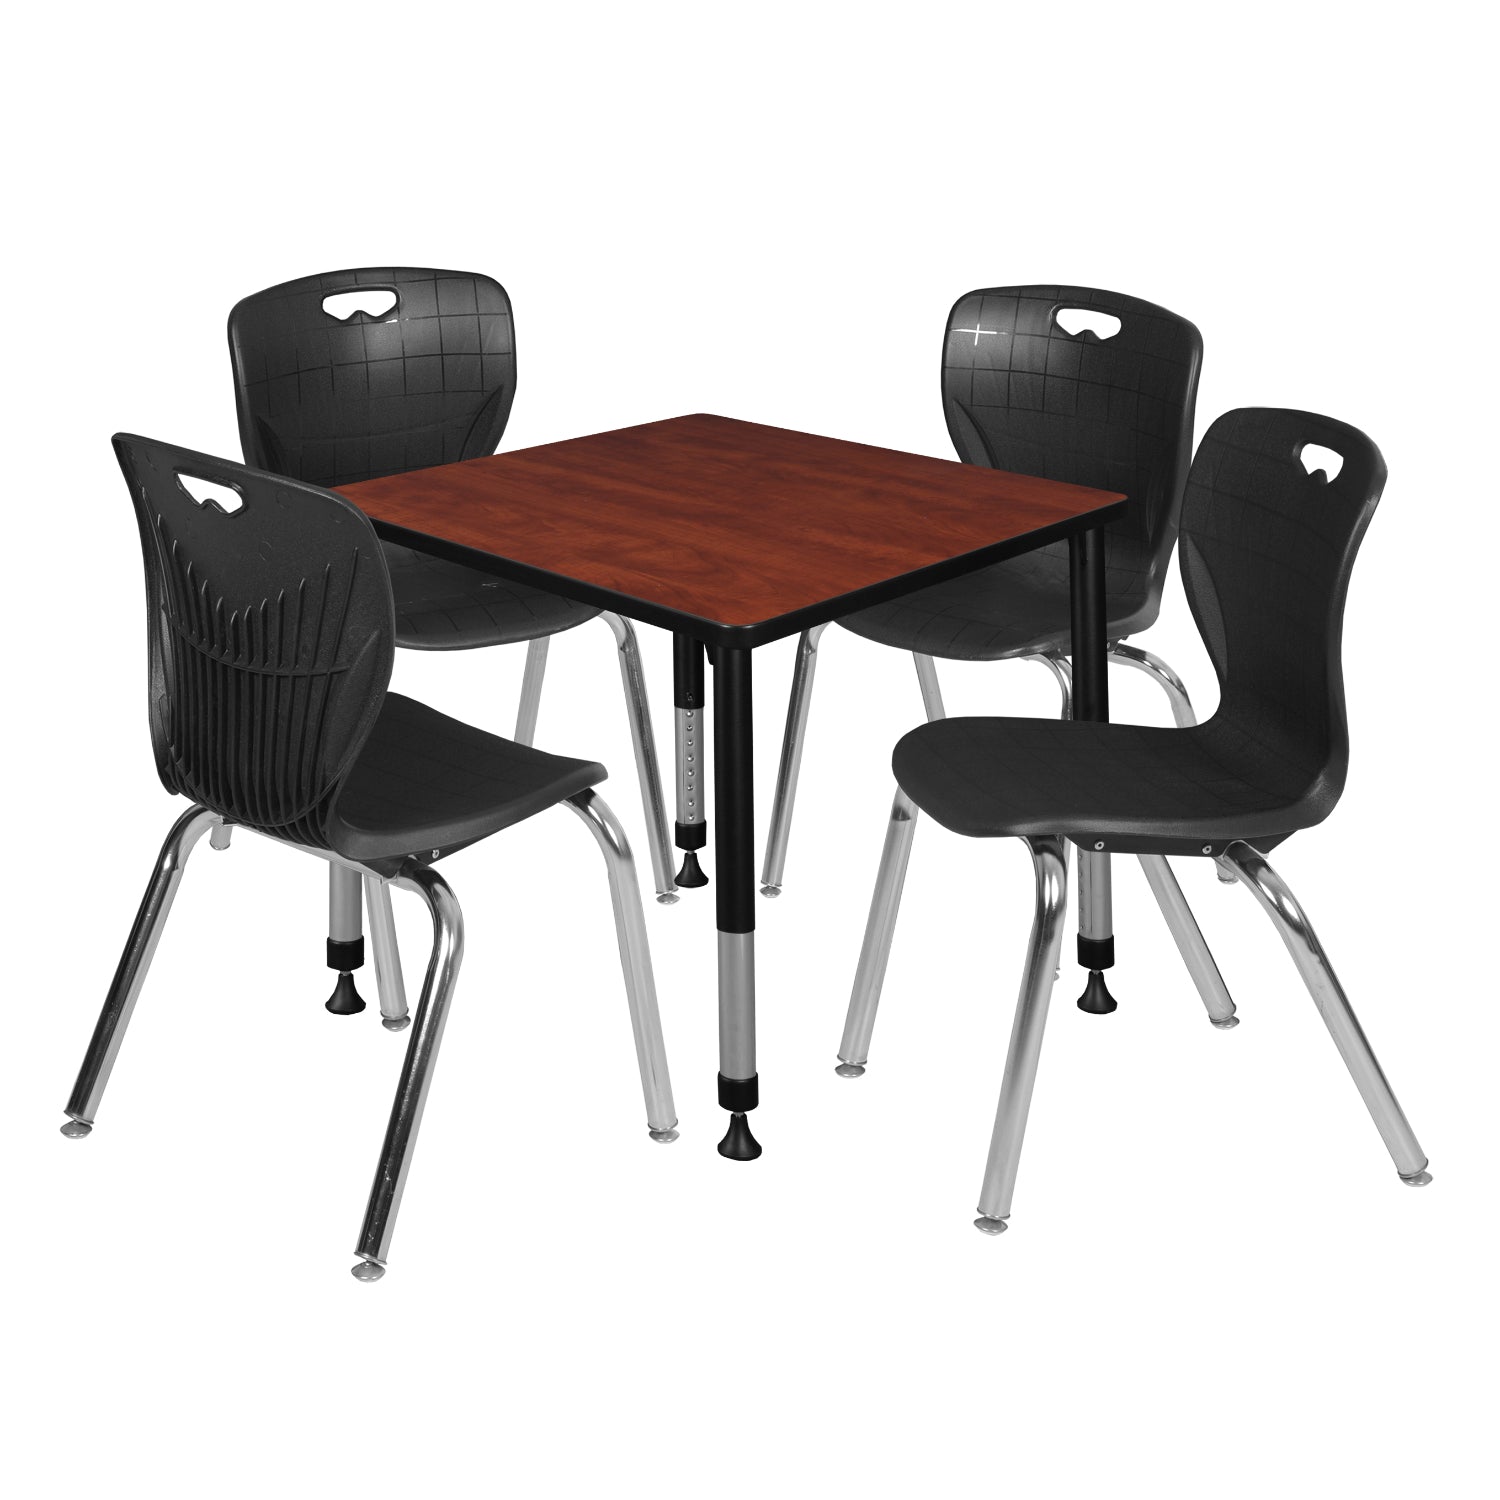 Kee Classroom Table and Chair Package, Kee 30" Square Adjustable Height Table with 4 Andy 18" Stack Chairs